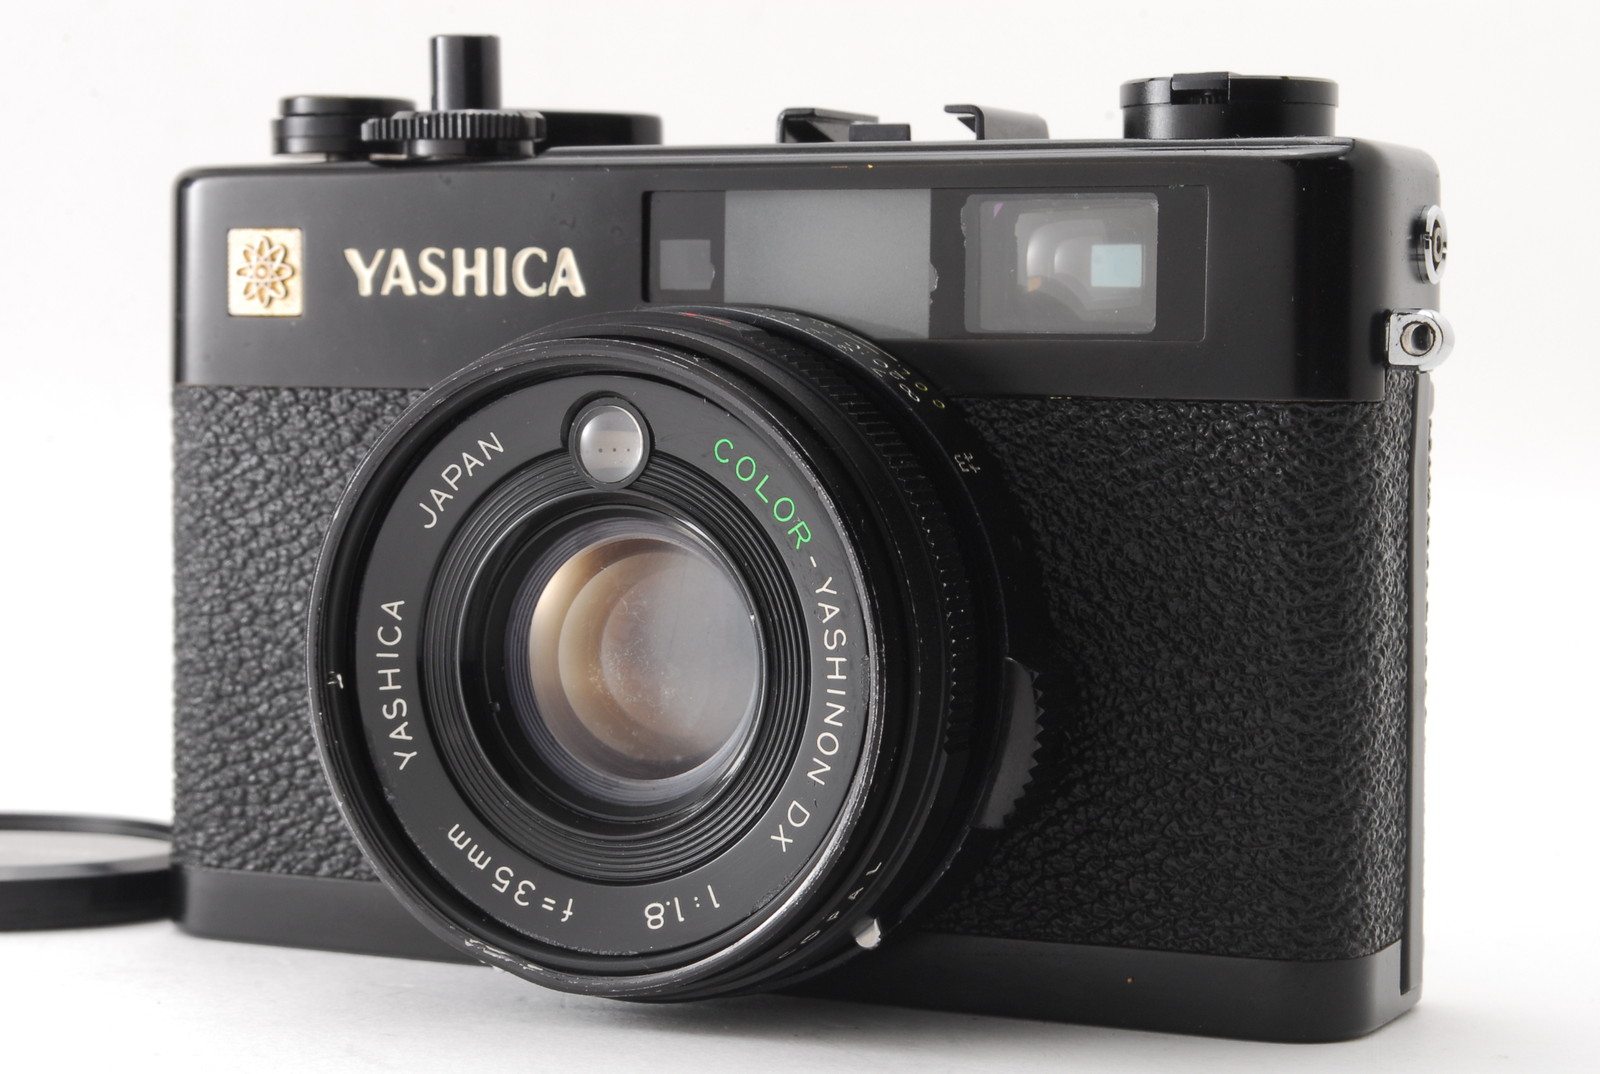 PROMOTION. EXC+++ Yashica Electro 35CC Rangefinder 35mm Film Camera, Front Cap from Japan